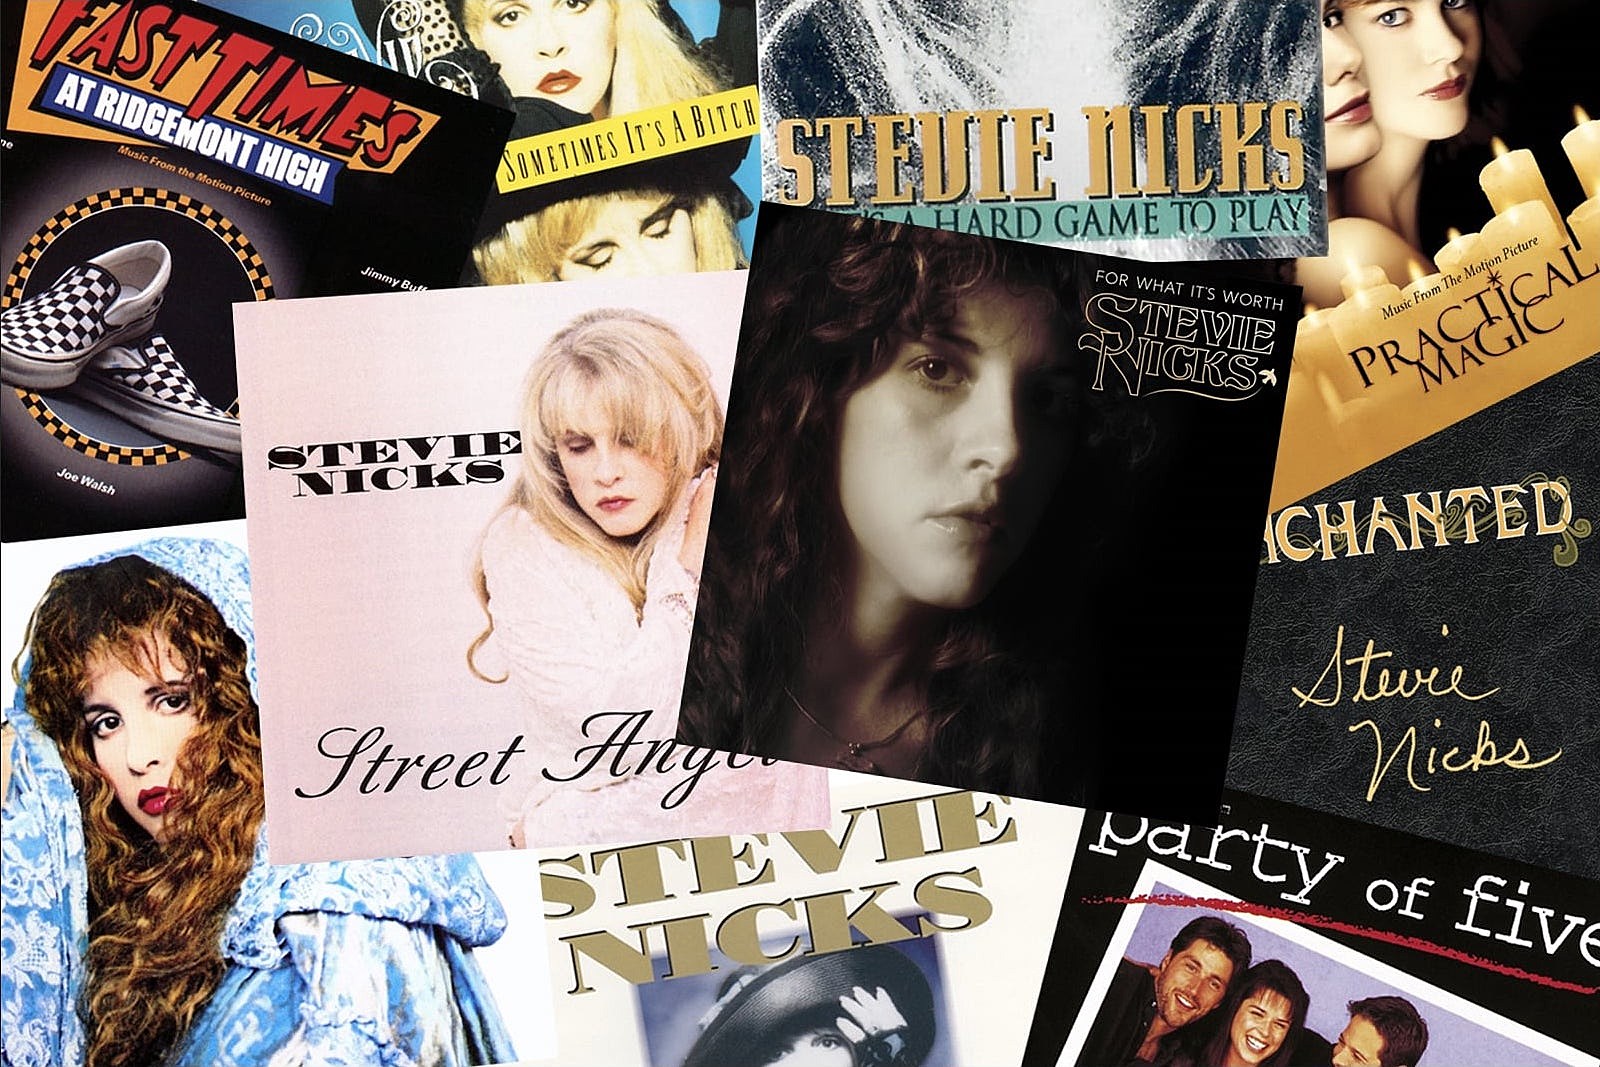 The Stories Behind 10 Rare Songs by Stevie Nicks